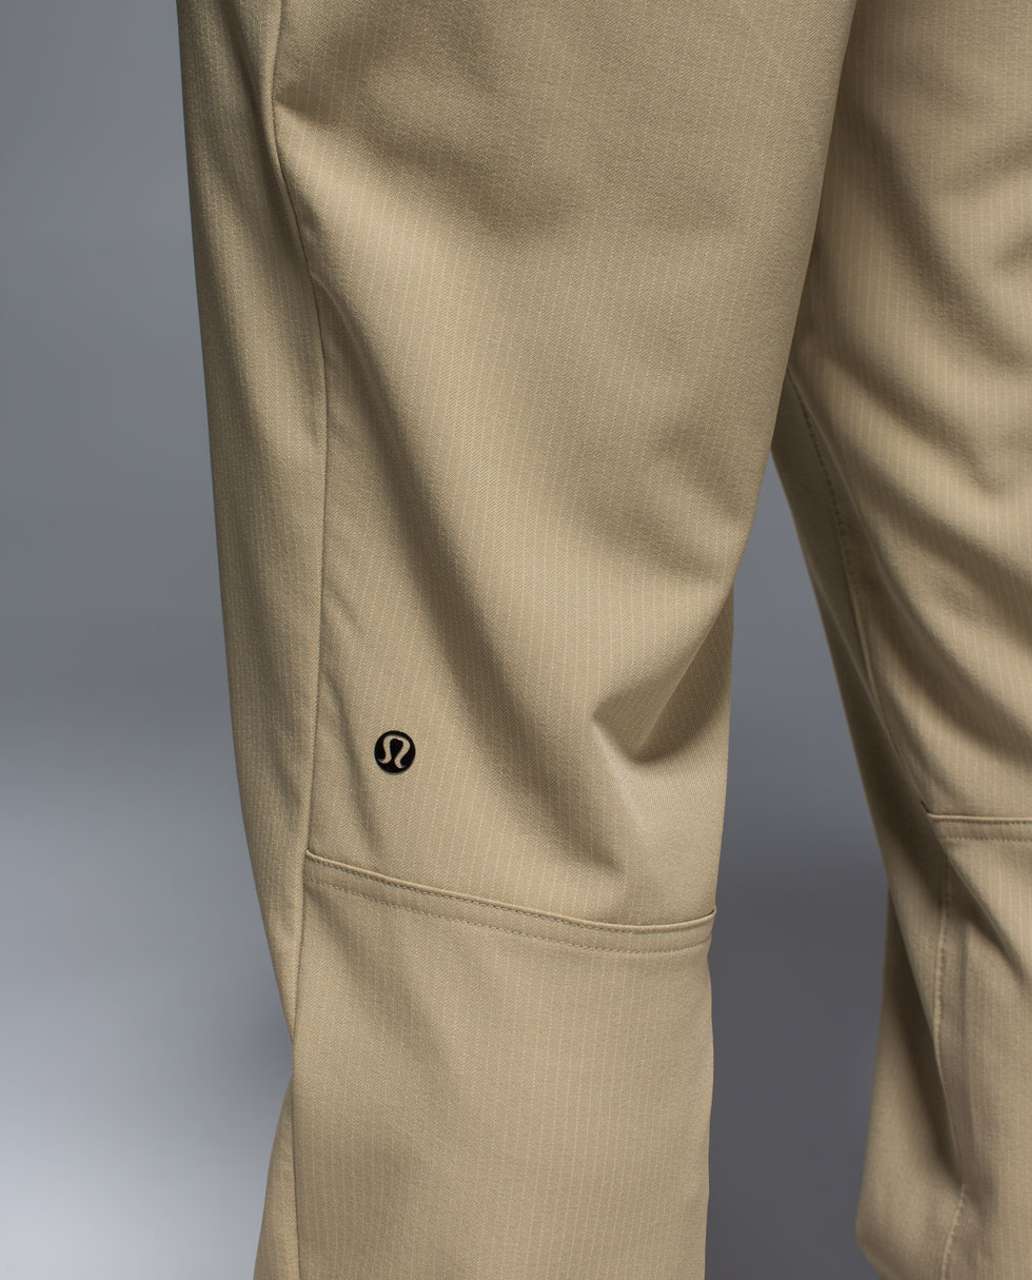 Lululemon Ascent Pant - Tropical Tan (First Release)